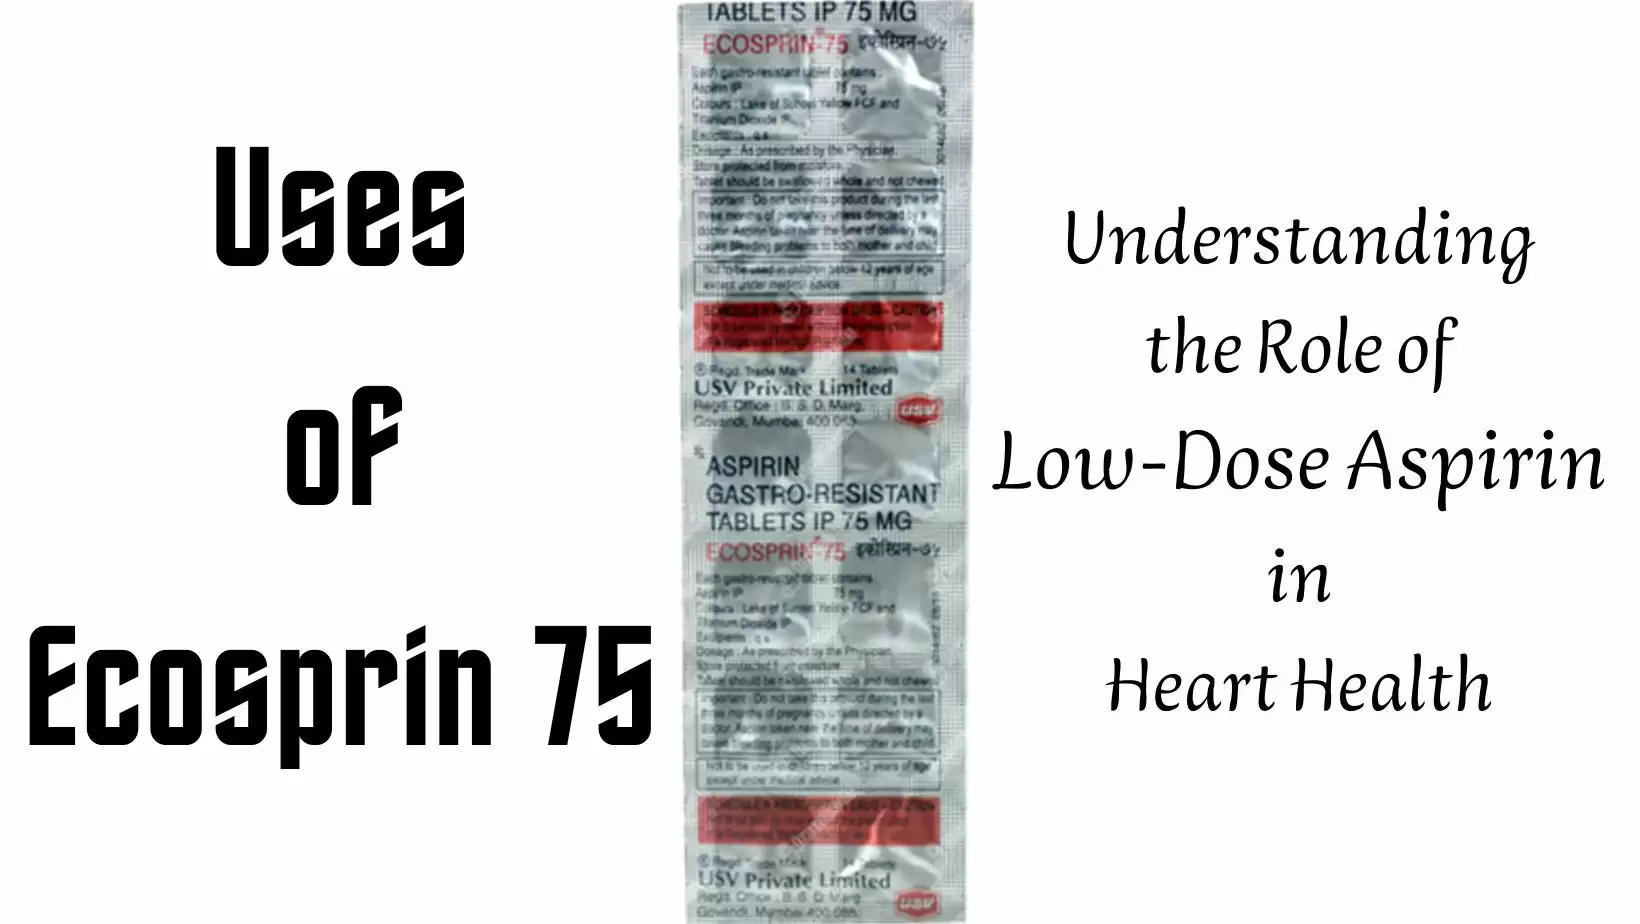 Ecosprin 75 Uses: Understanding the Role of Low-Dose Aspirin in Heart Health